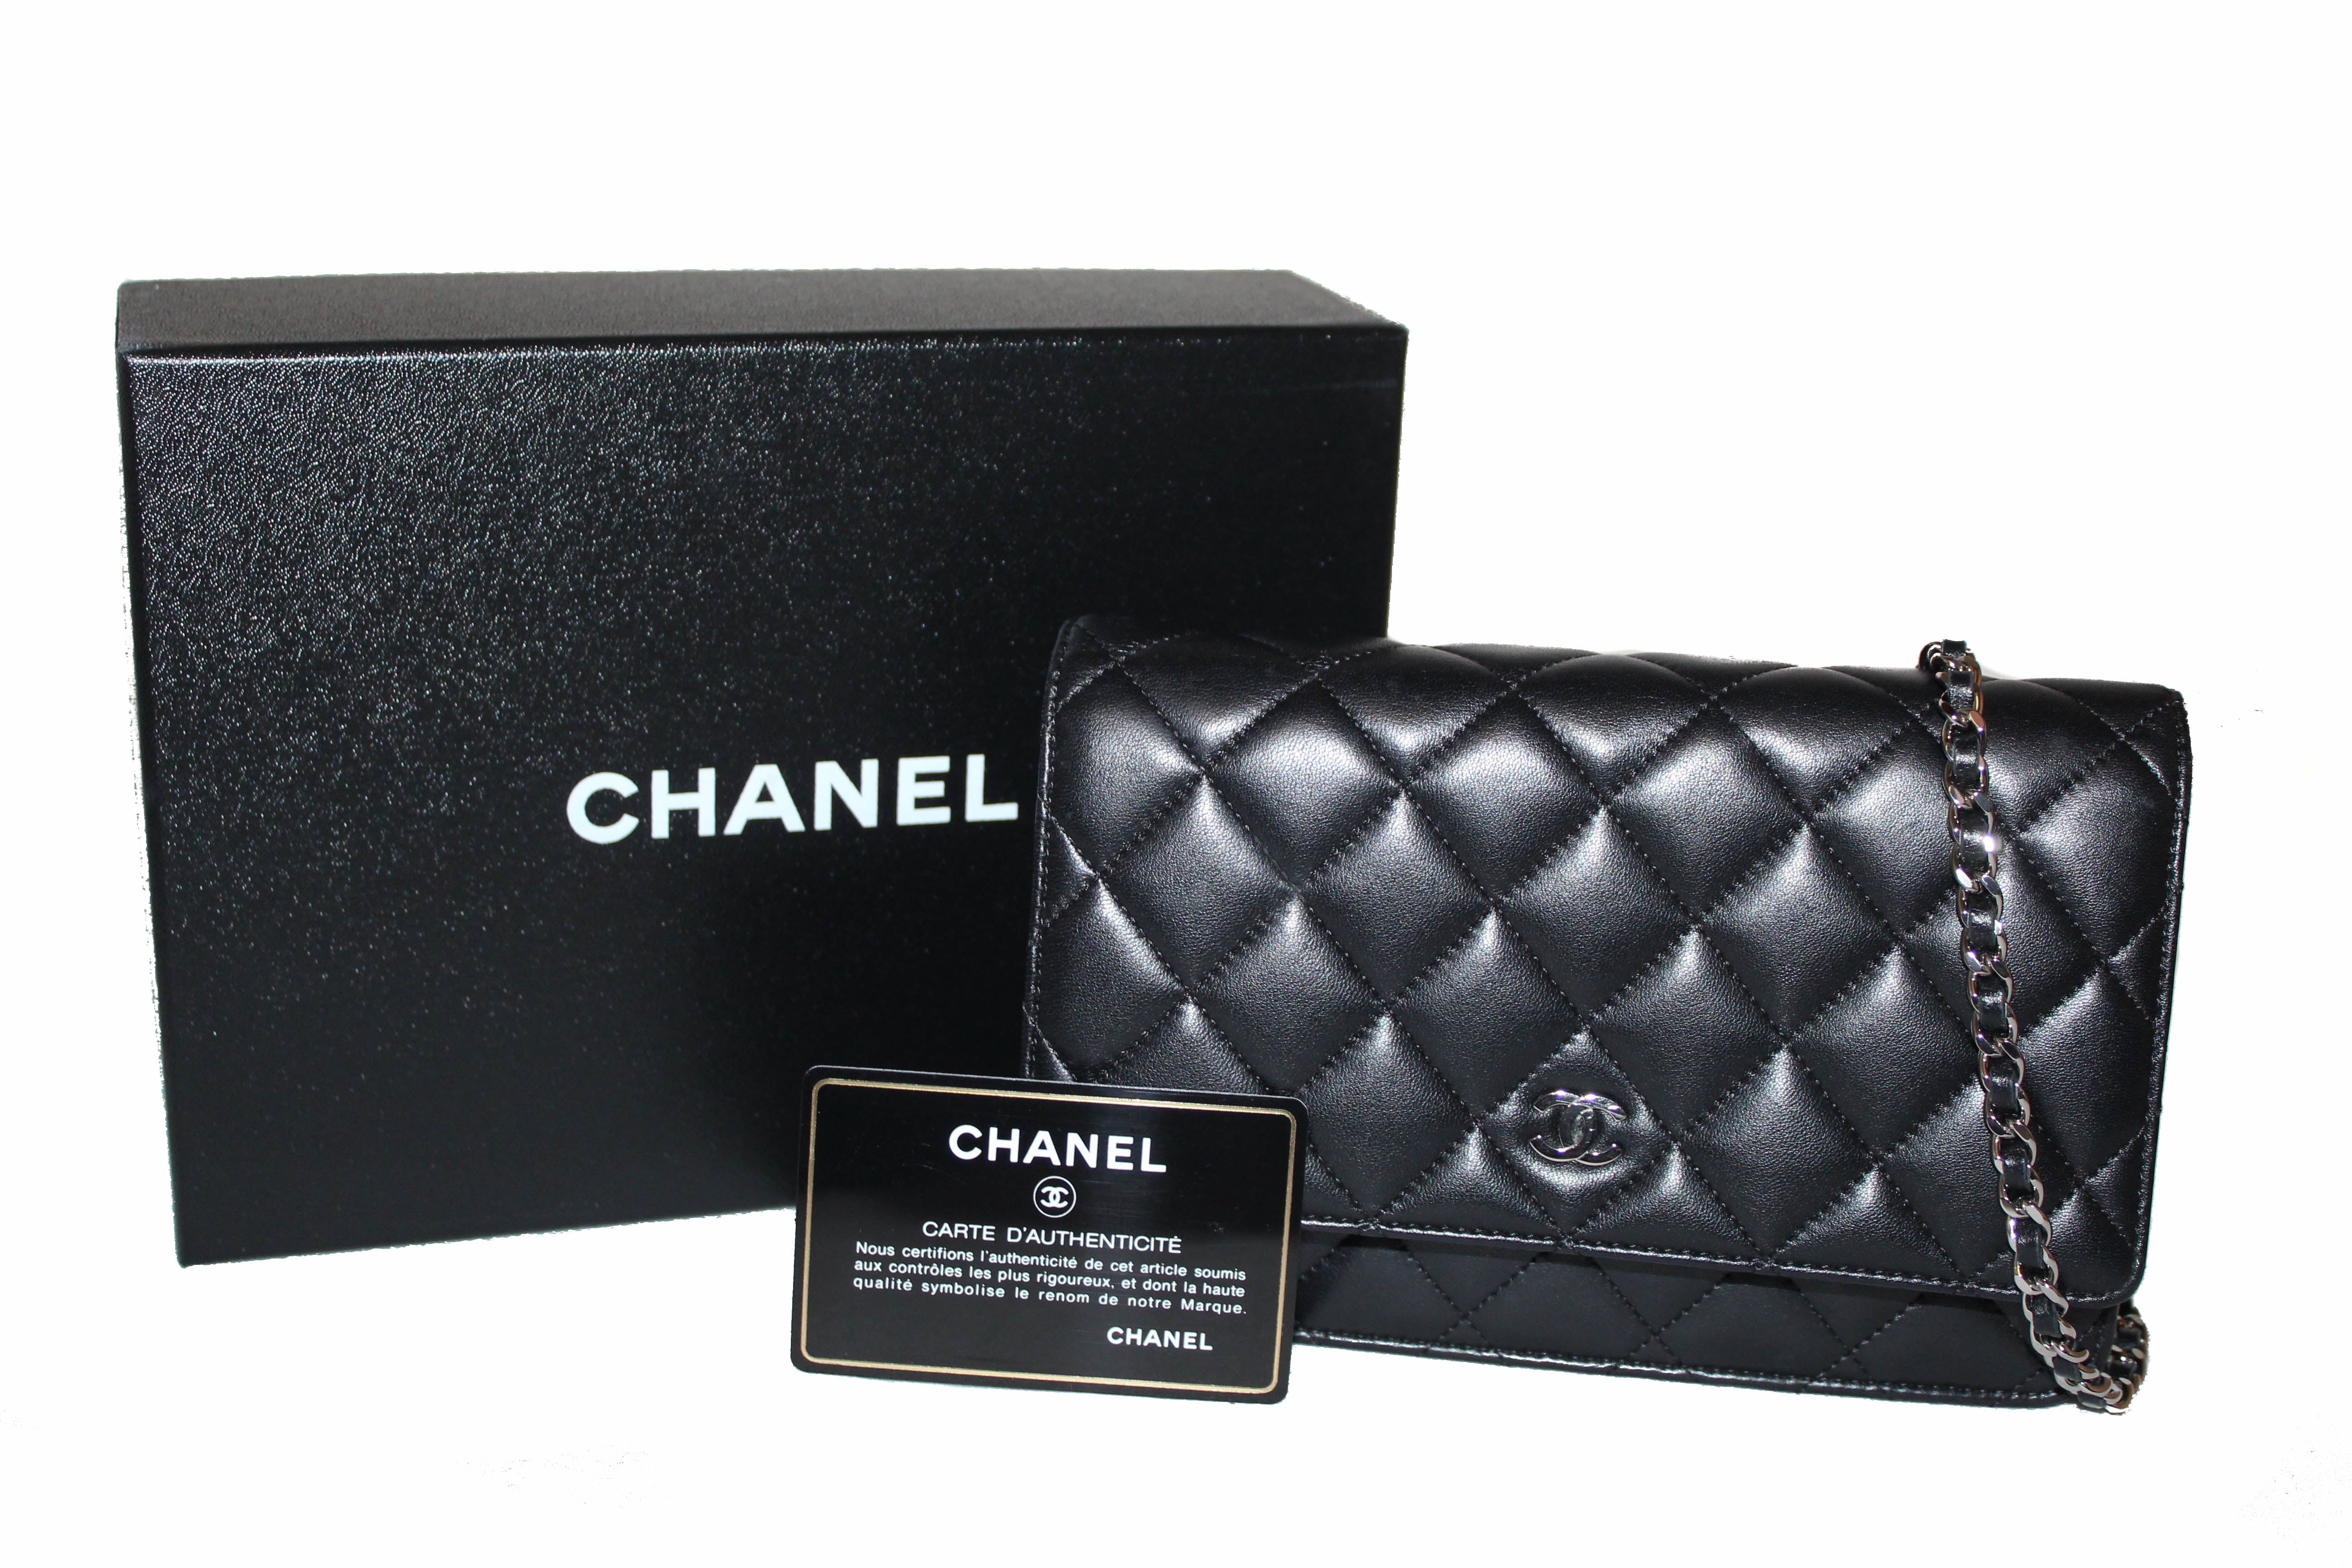 Authentic Chanel Black Quilted Lambskin Leather Wallet on Chain WOC Messenger Bag